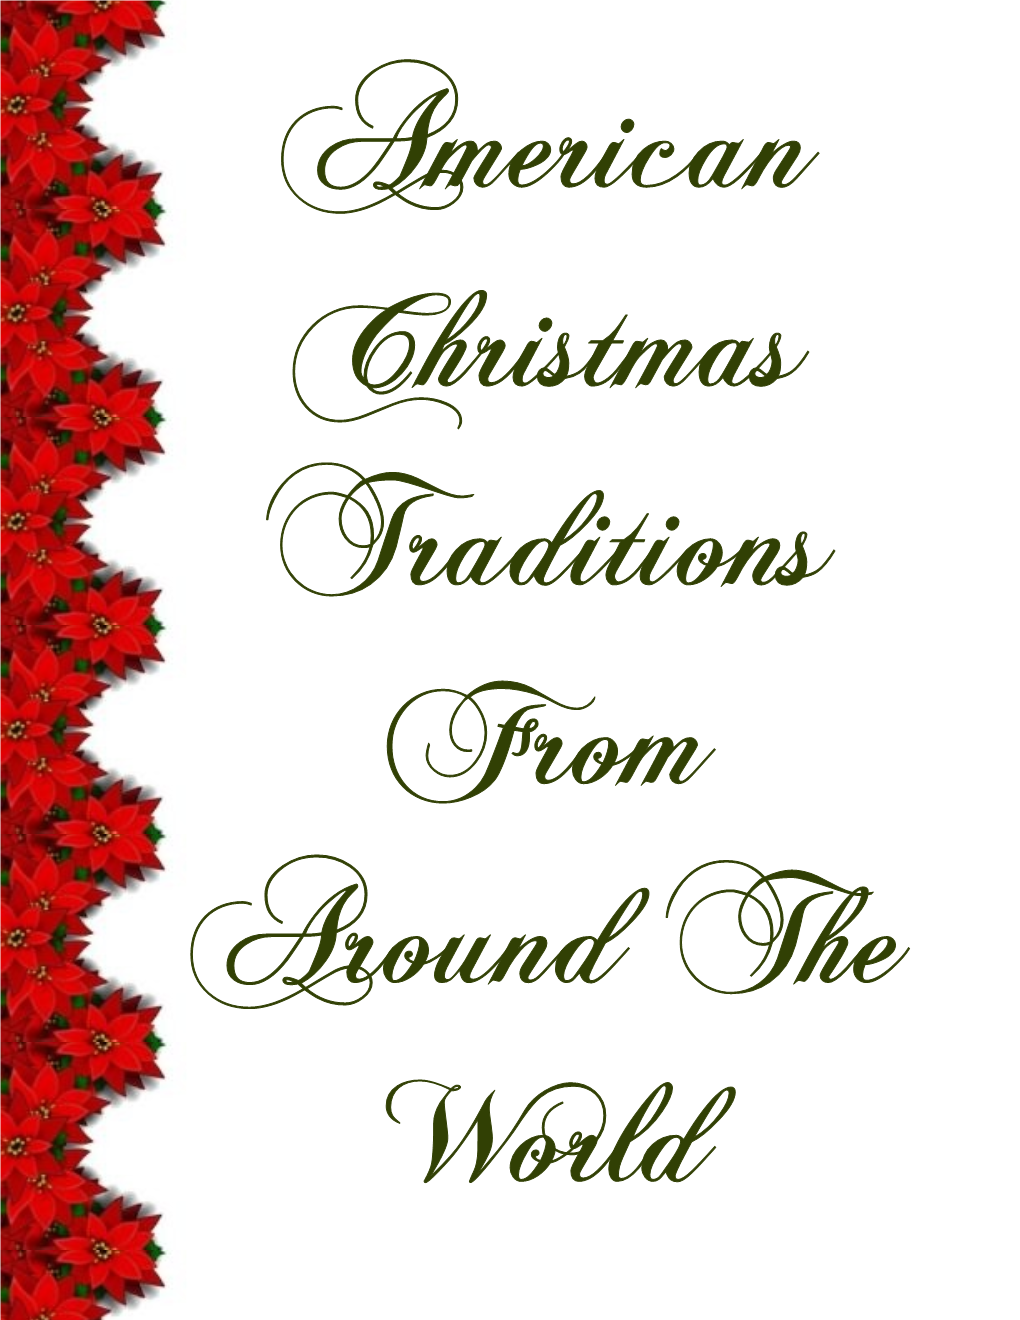 American Christmas Traditions...From Around the World